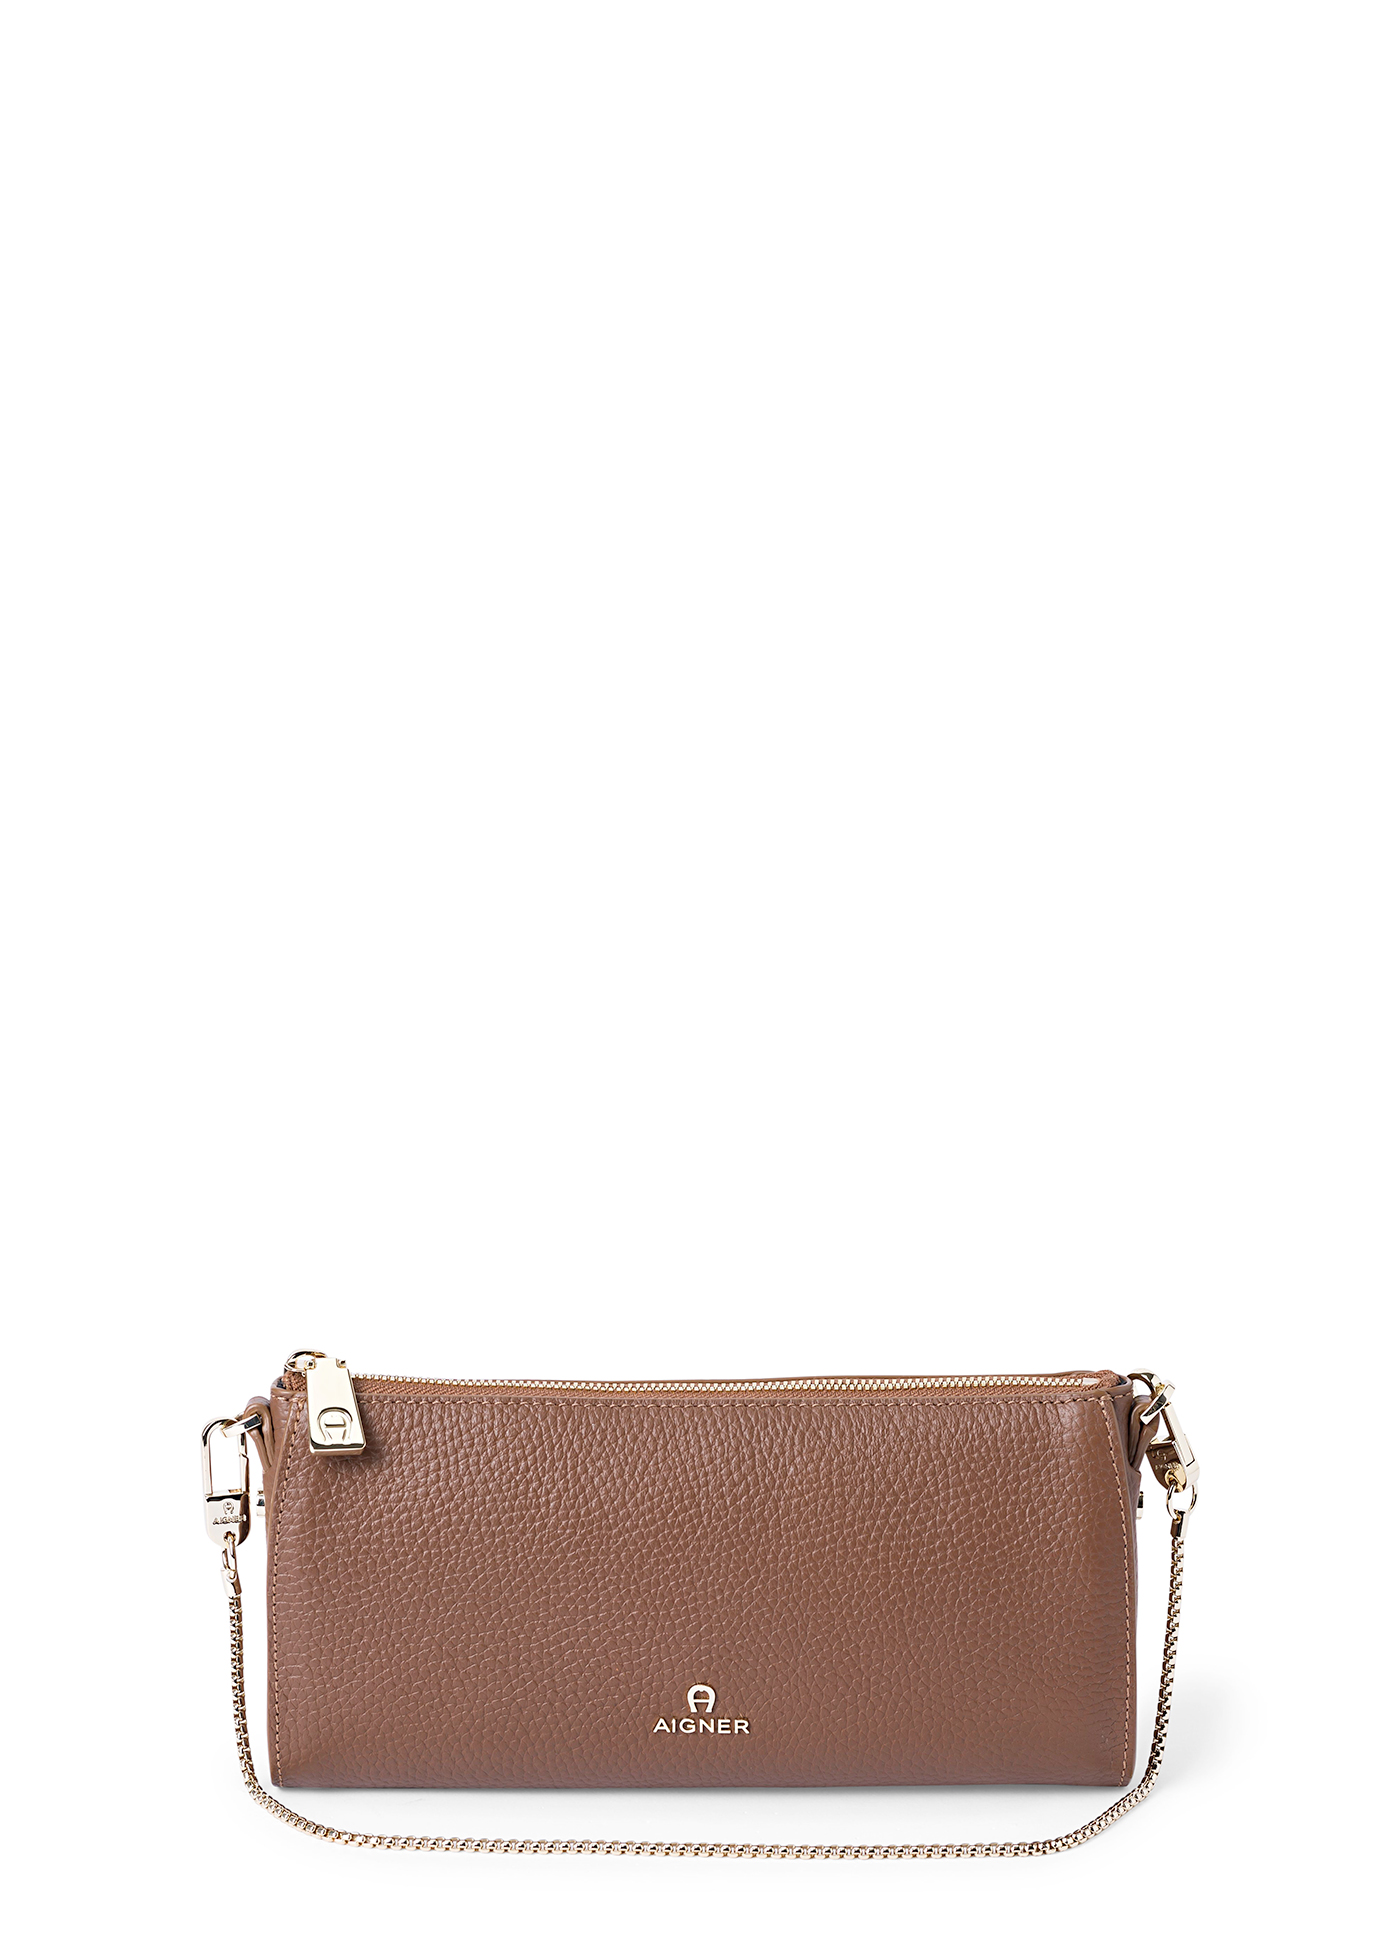 IVY S Cowhide Mini-Tasche image number 0